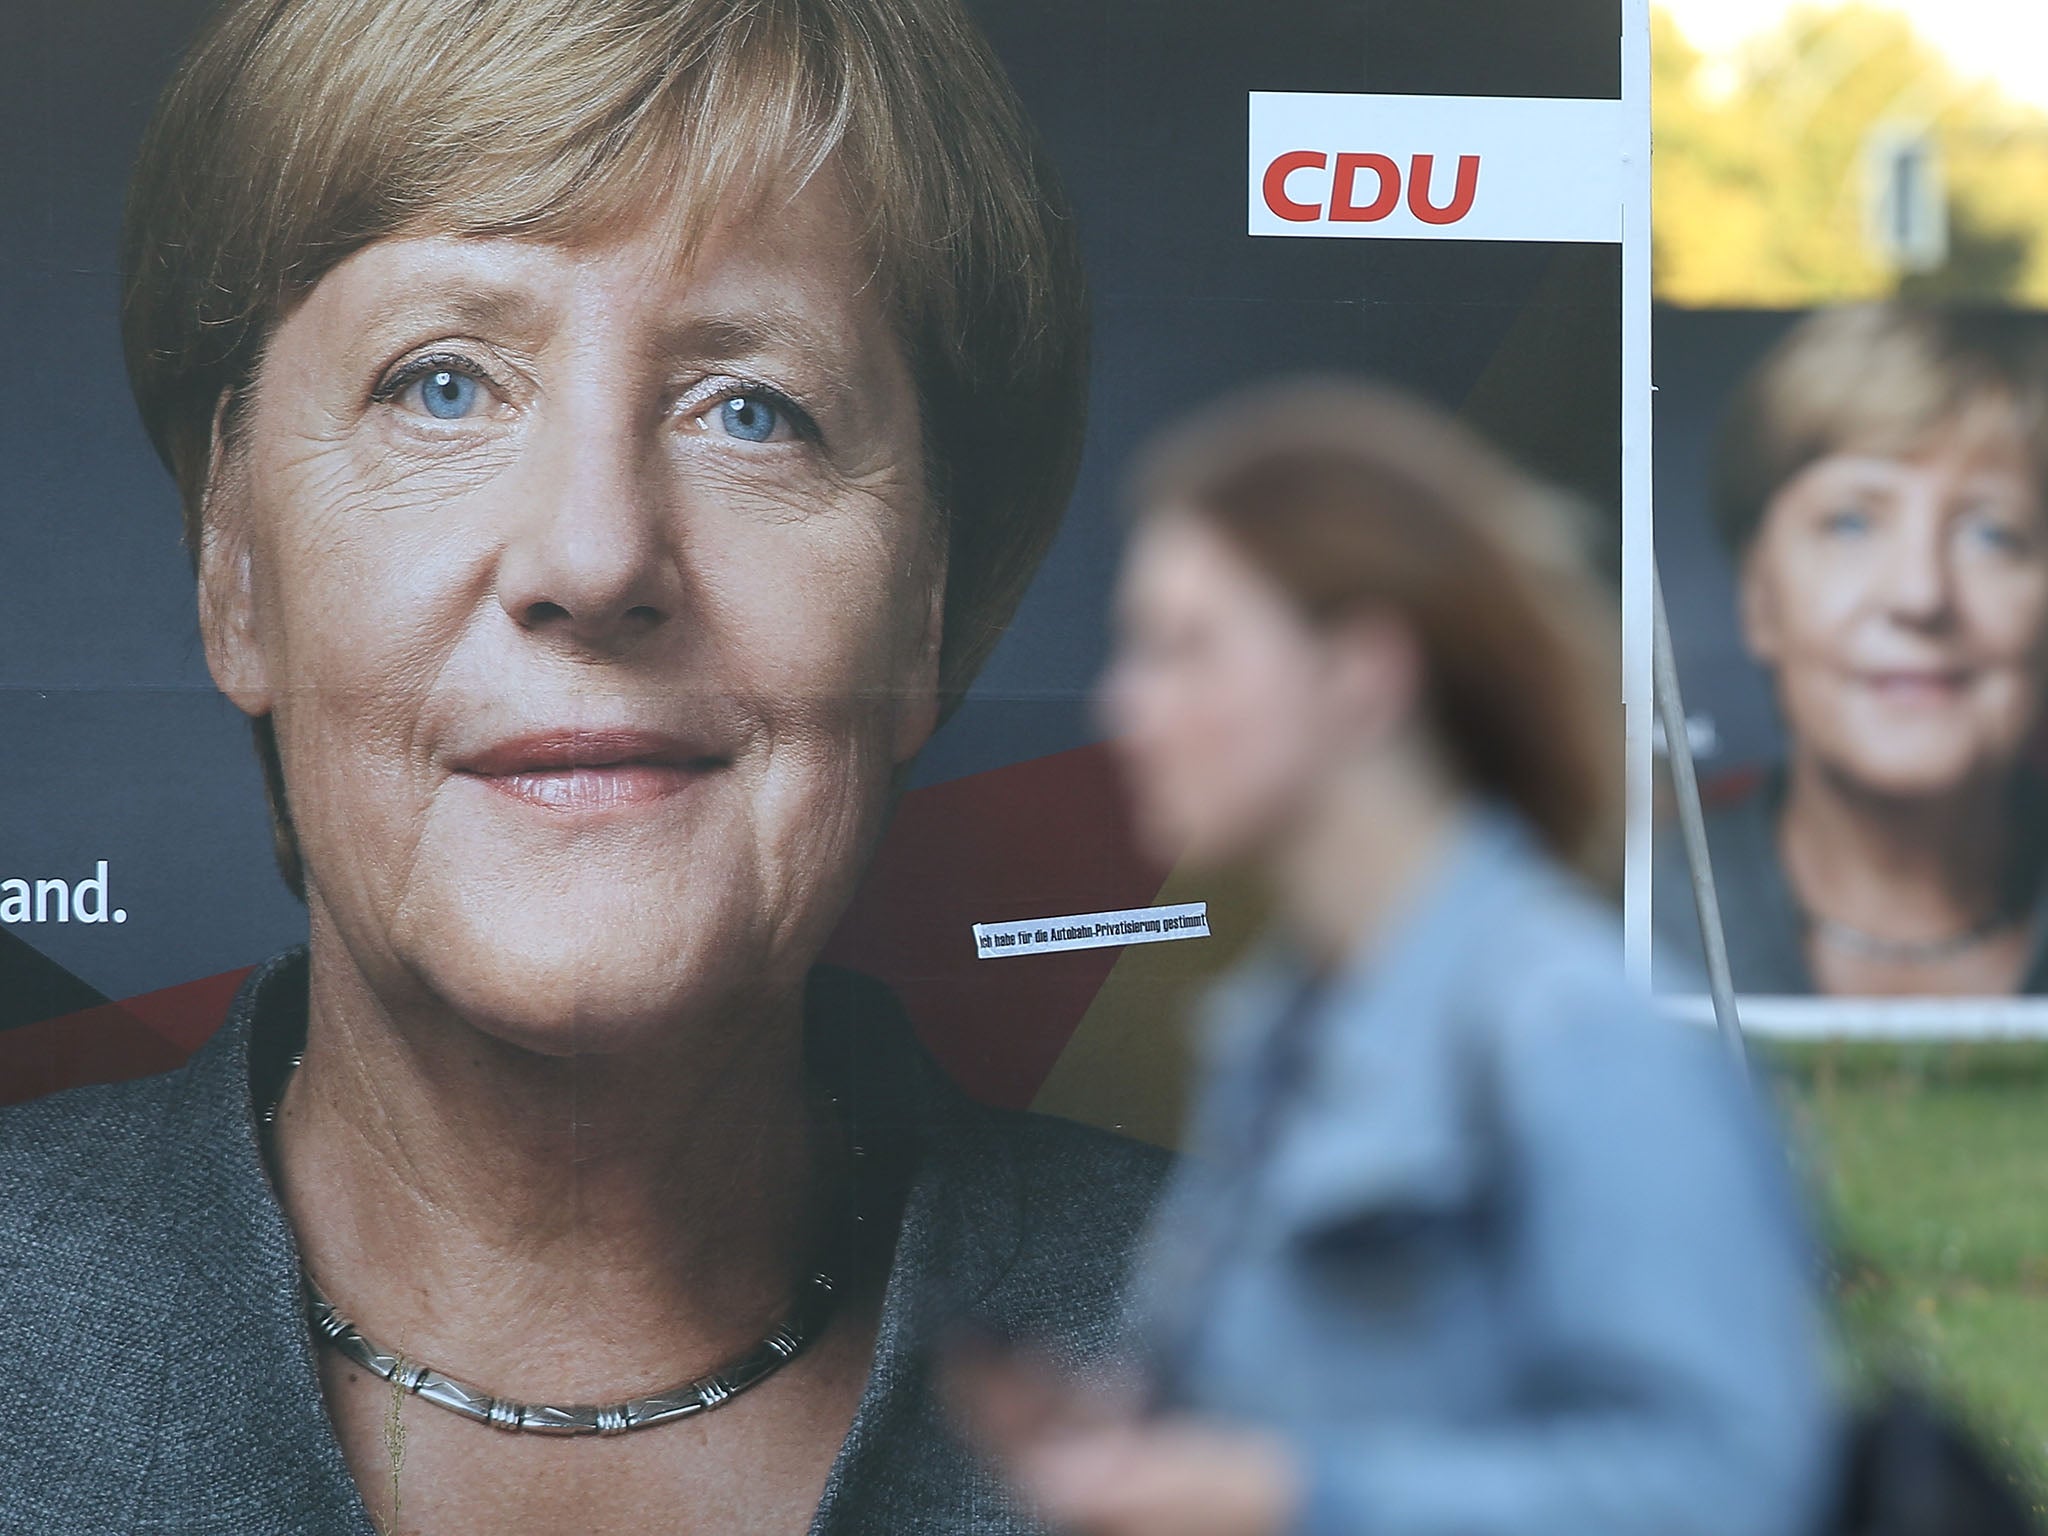 Angela Merkel is considered to be one of the most powerful women in the world